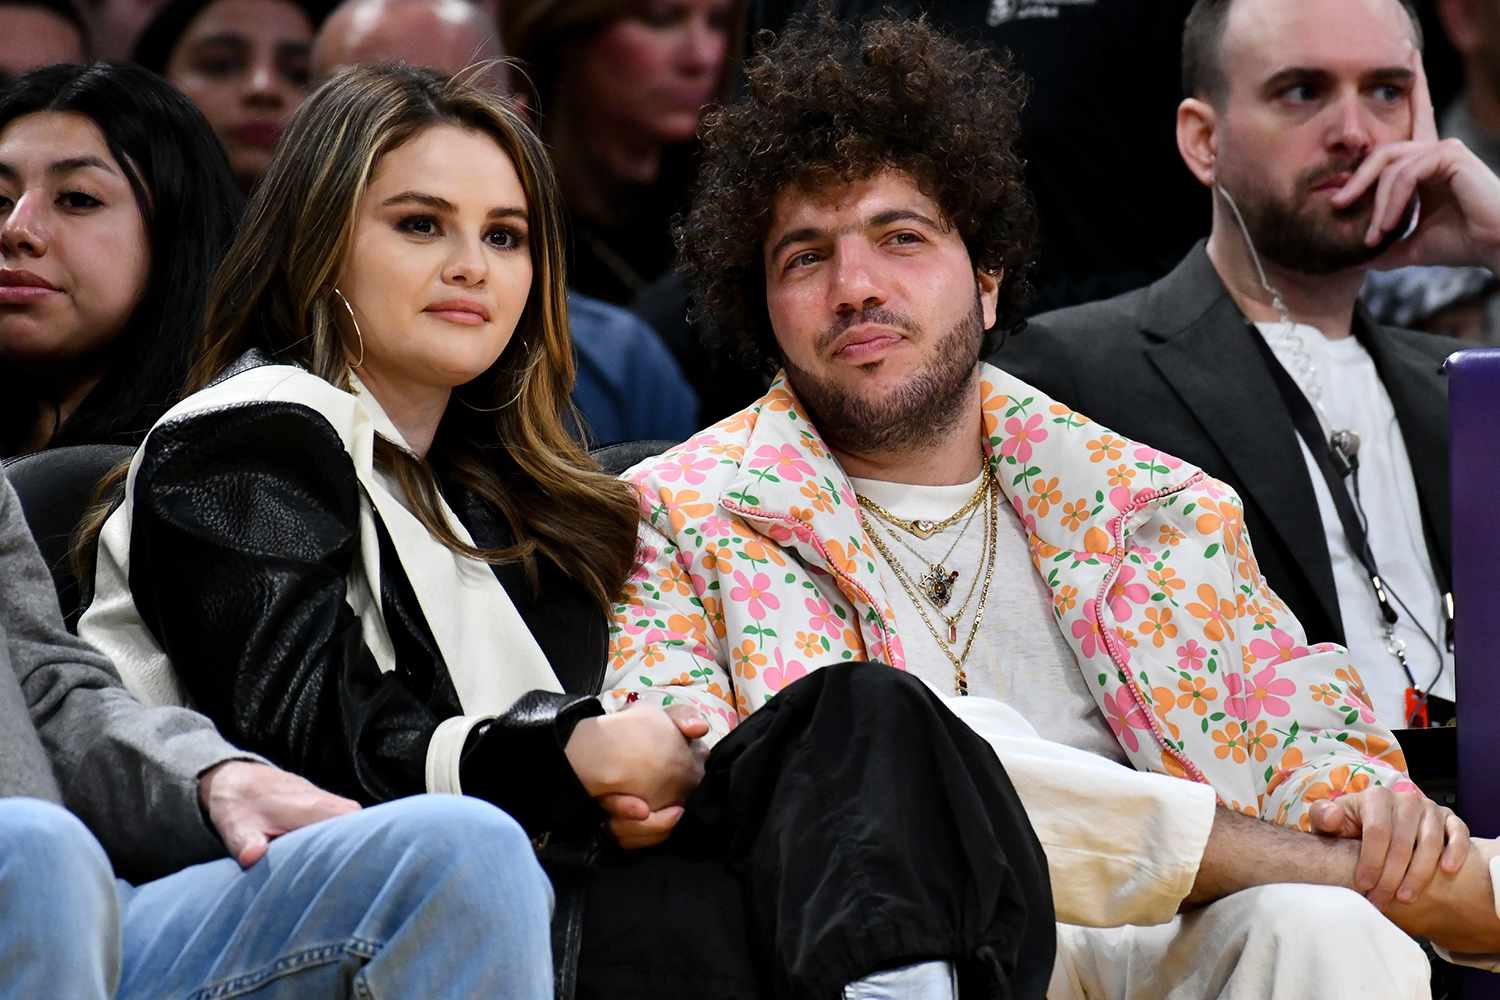 Selena Gomez Shares Romantic Tissue Paper Note from Benny Blanco: ‘I Made You Steak’